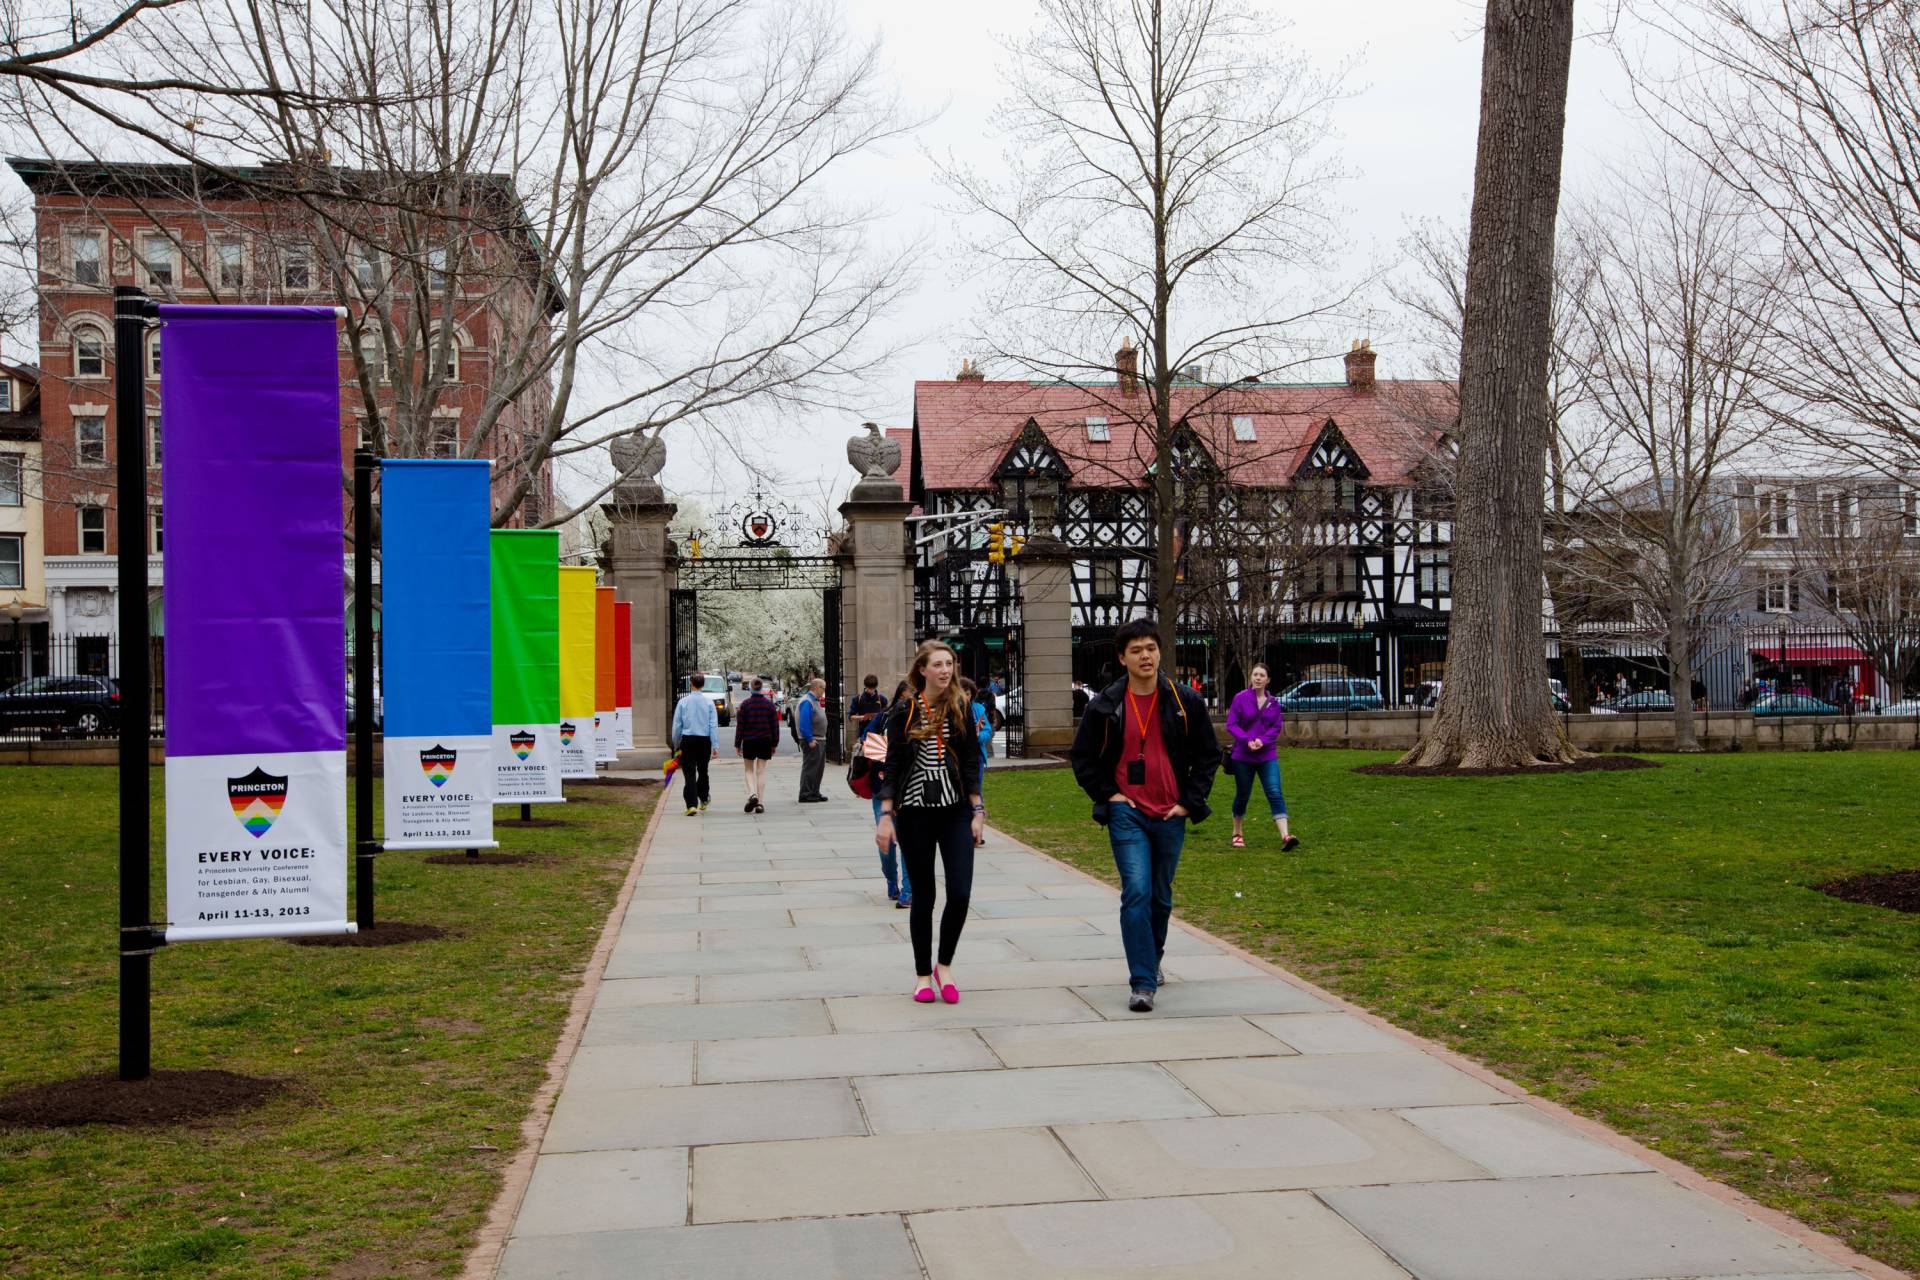 Conference attendees make their way to Nassau Hall, where rainbow flags have been installed for the occasion